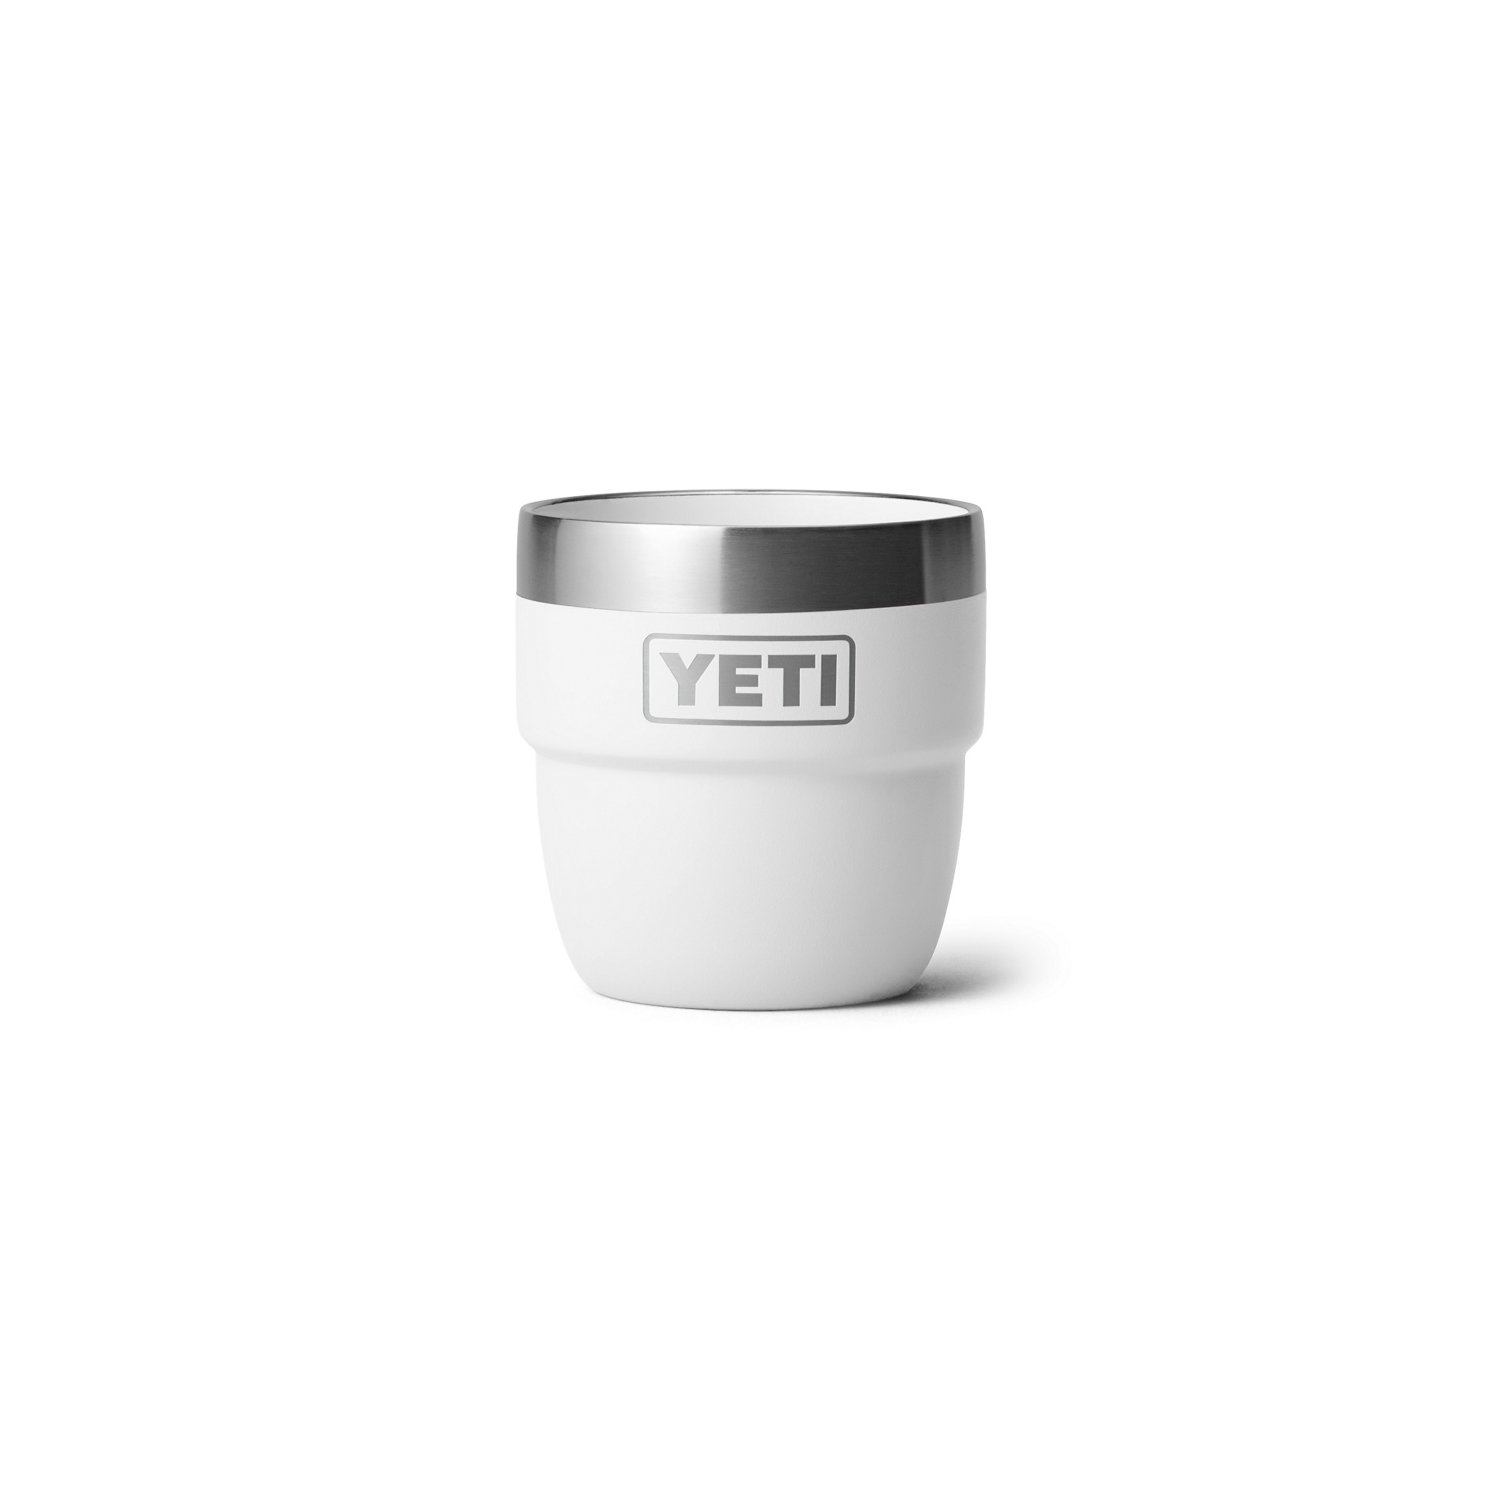 https://academy.scene7.com/is/image/academy//drinkware/yeti-rambler-4-oz-espresso-cups-2-pack-21071501858-white/7a9134c8f15d4896bf847f43c3ae43a8?$pdp-mobile-gallery-ng$